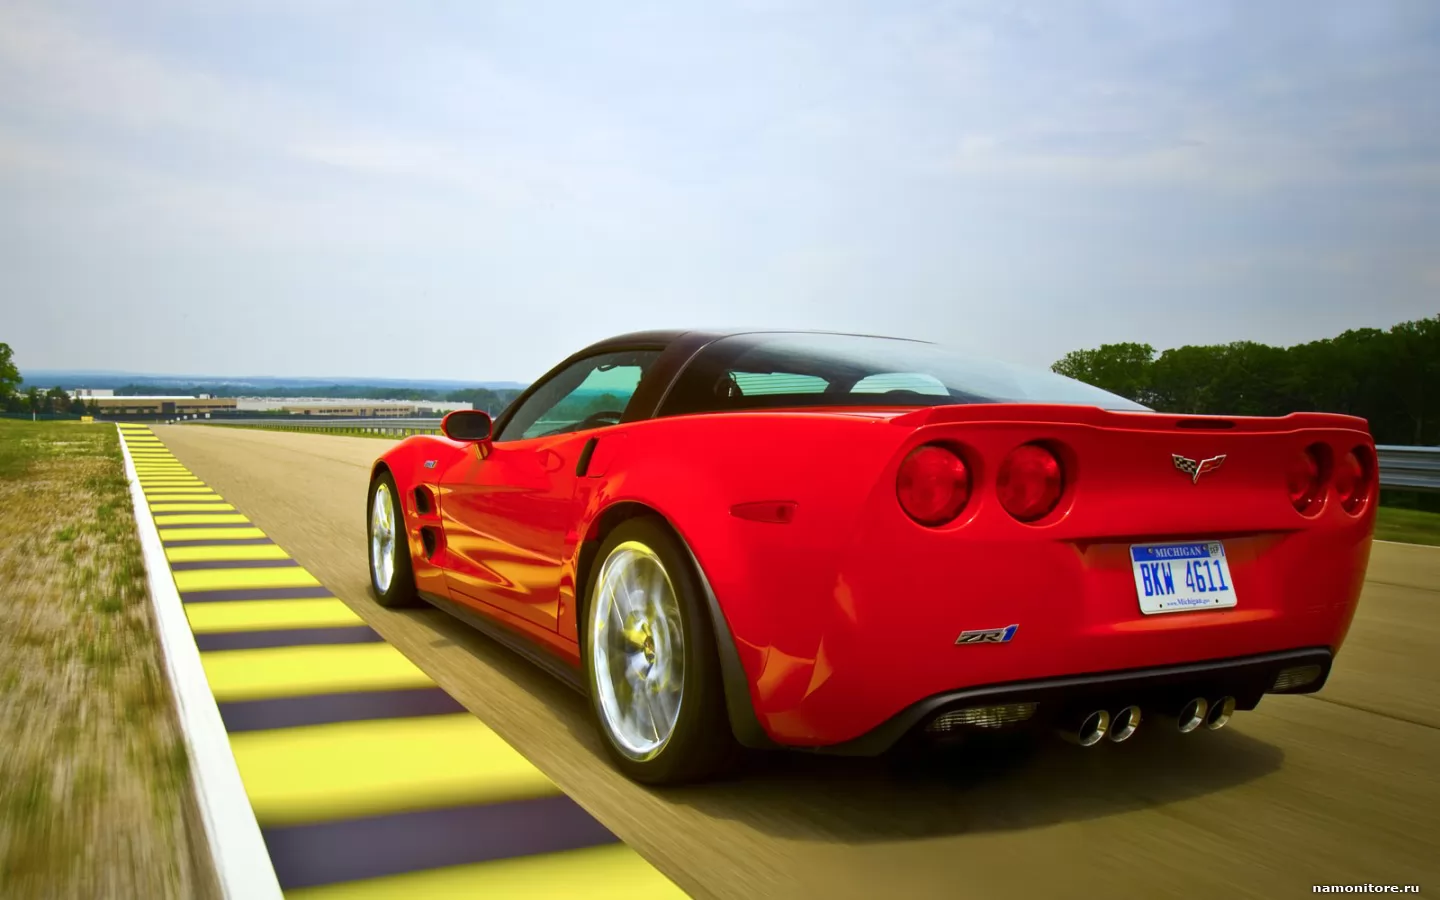 Chevrolet Corvette ZR1 with open top, cabriolets, cars, Chevrolet, red, tec...